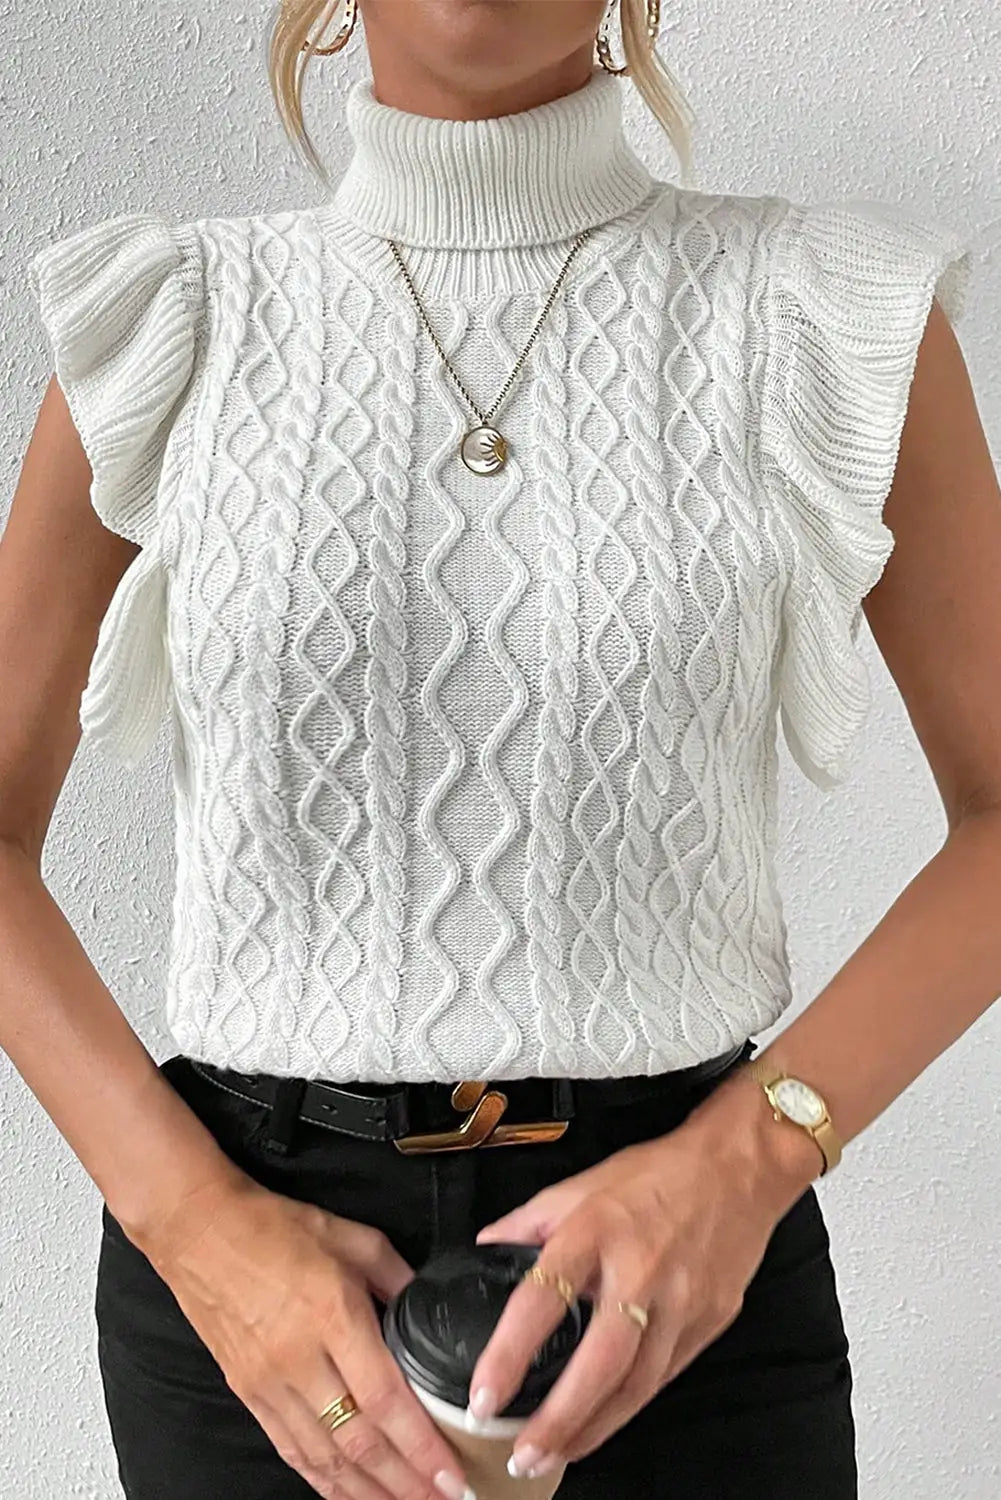 White turtle neck short sleeve cable knit ruffled sweater - l / 55% acrylic + 45% cotton - sweaters & cardigans